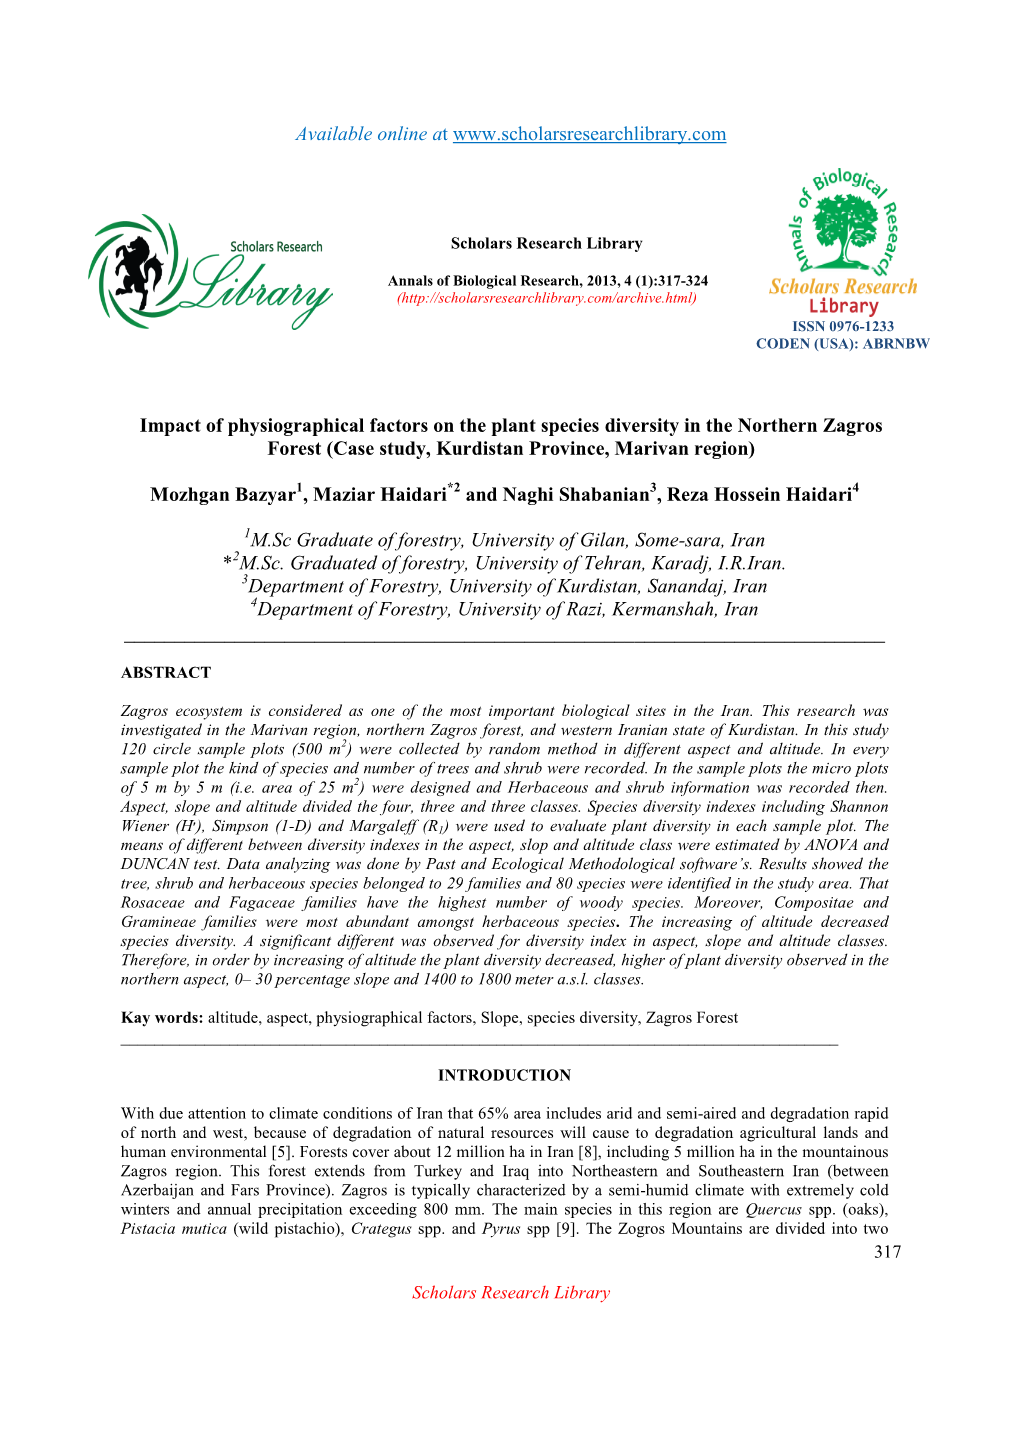 Impact of Physiographical Factors on the Plant Species Diversity in the Northern Zagros Forest (Case Study, Kurdistan Province, Marivan Region)